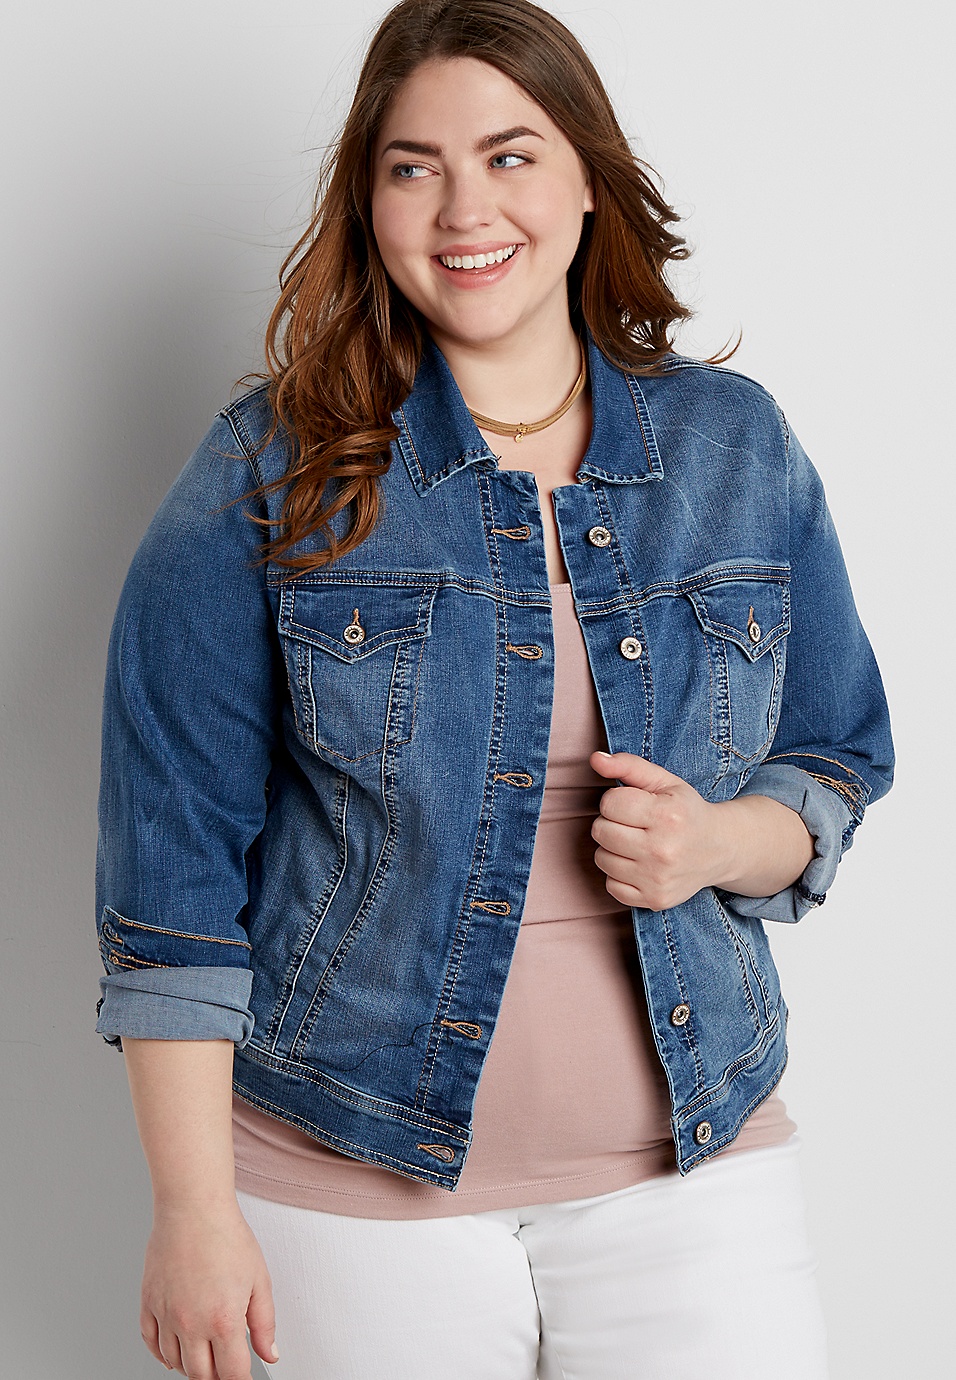 Women's Daily Denim Jacket Duluth Trading Company, 49% OFF